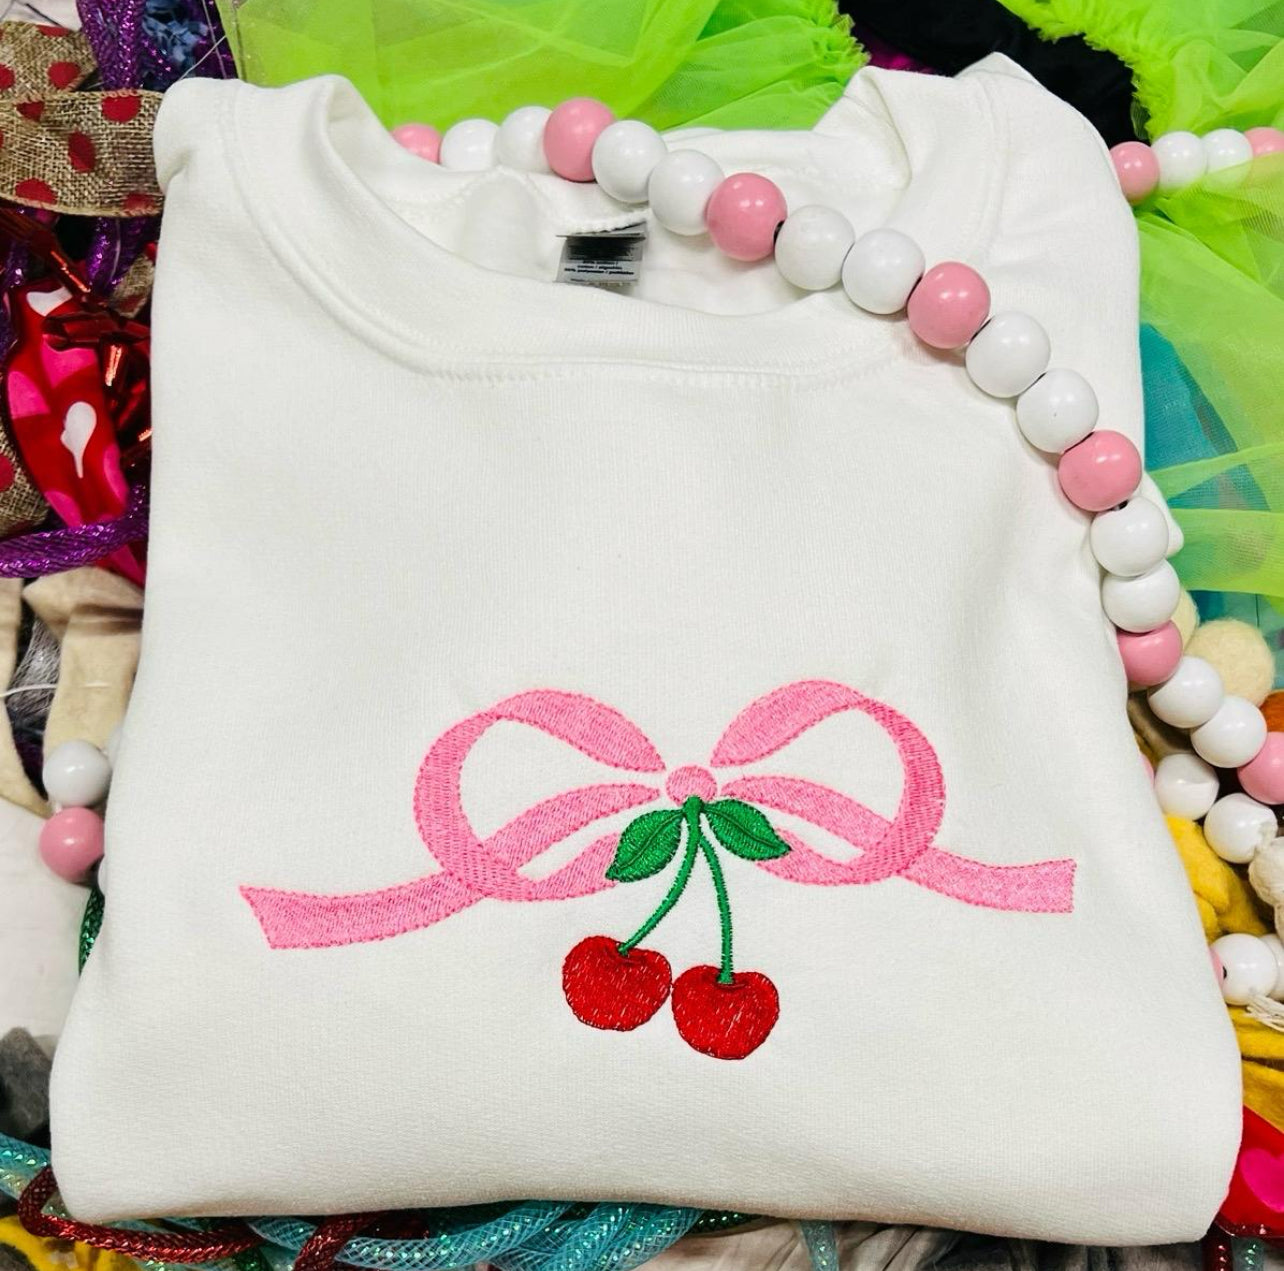 Embroidered Bow with Cherry Tee of Sweatshirt, Vintage Bow, Pink Bow, Cherry Shirt